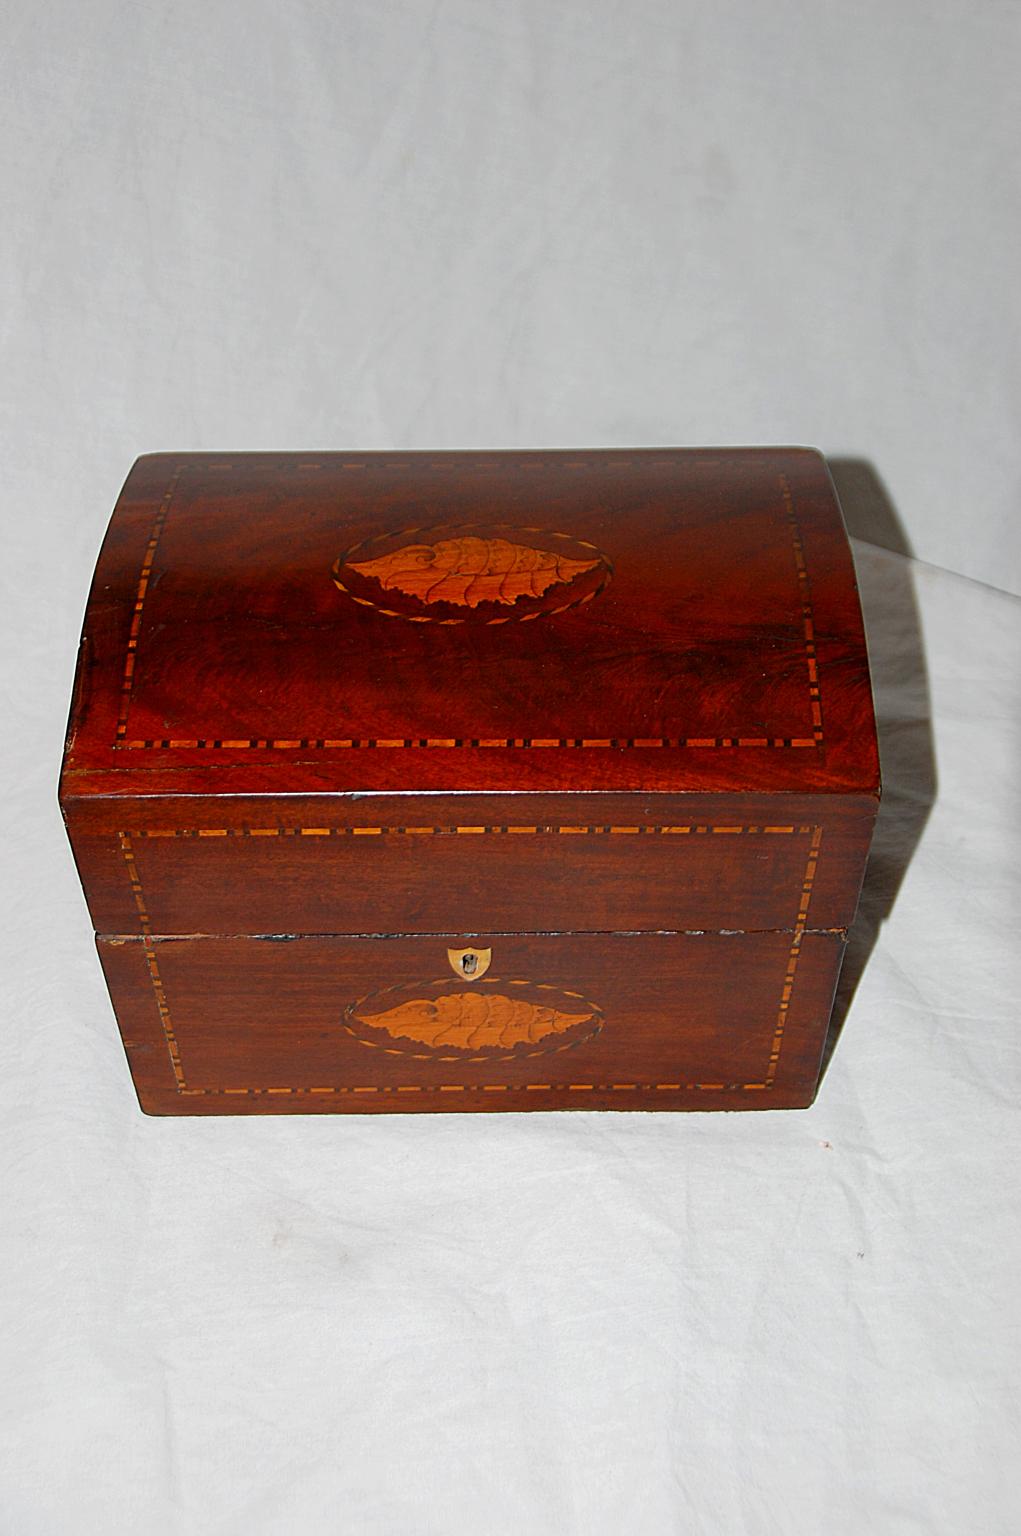 English Georgian domed top liquor box in mahogany with shell inlay to top and front and patterned stringing in boxwood and ebony to three sides and framing the shell inlays. The interior of the box has its original velvet lining and six original